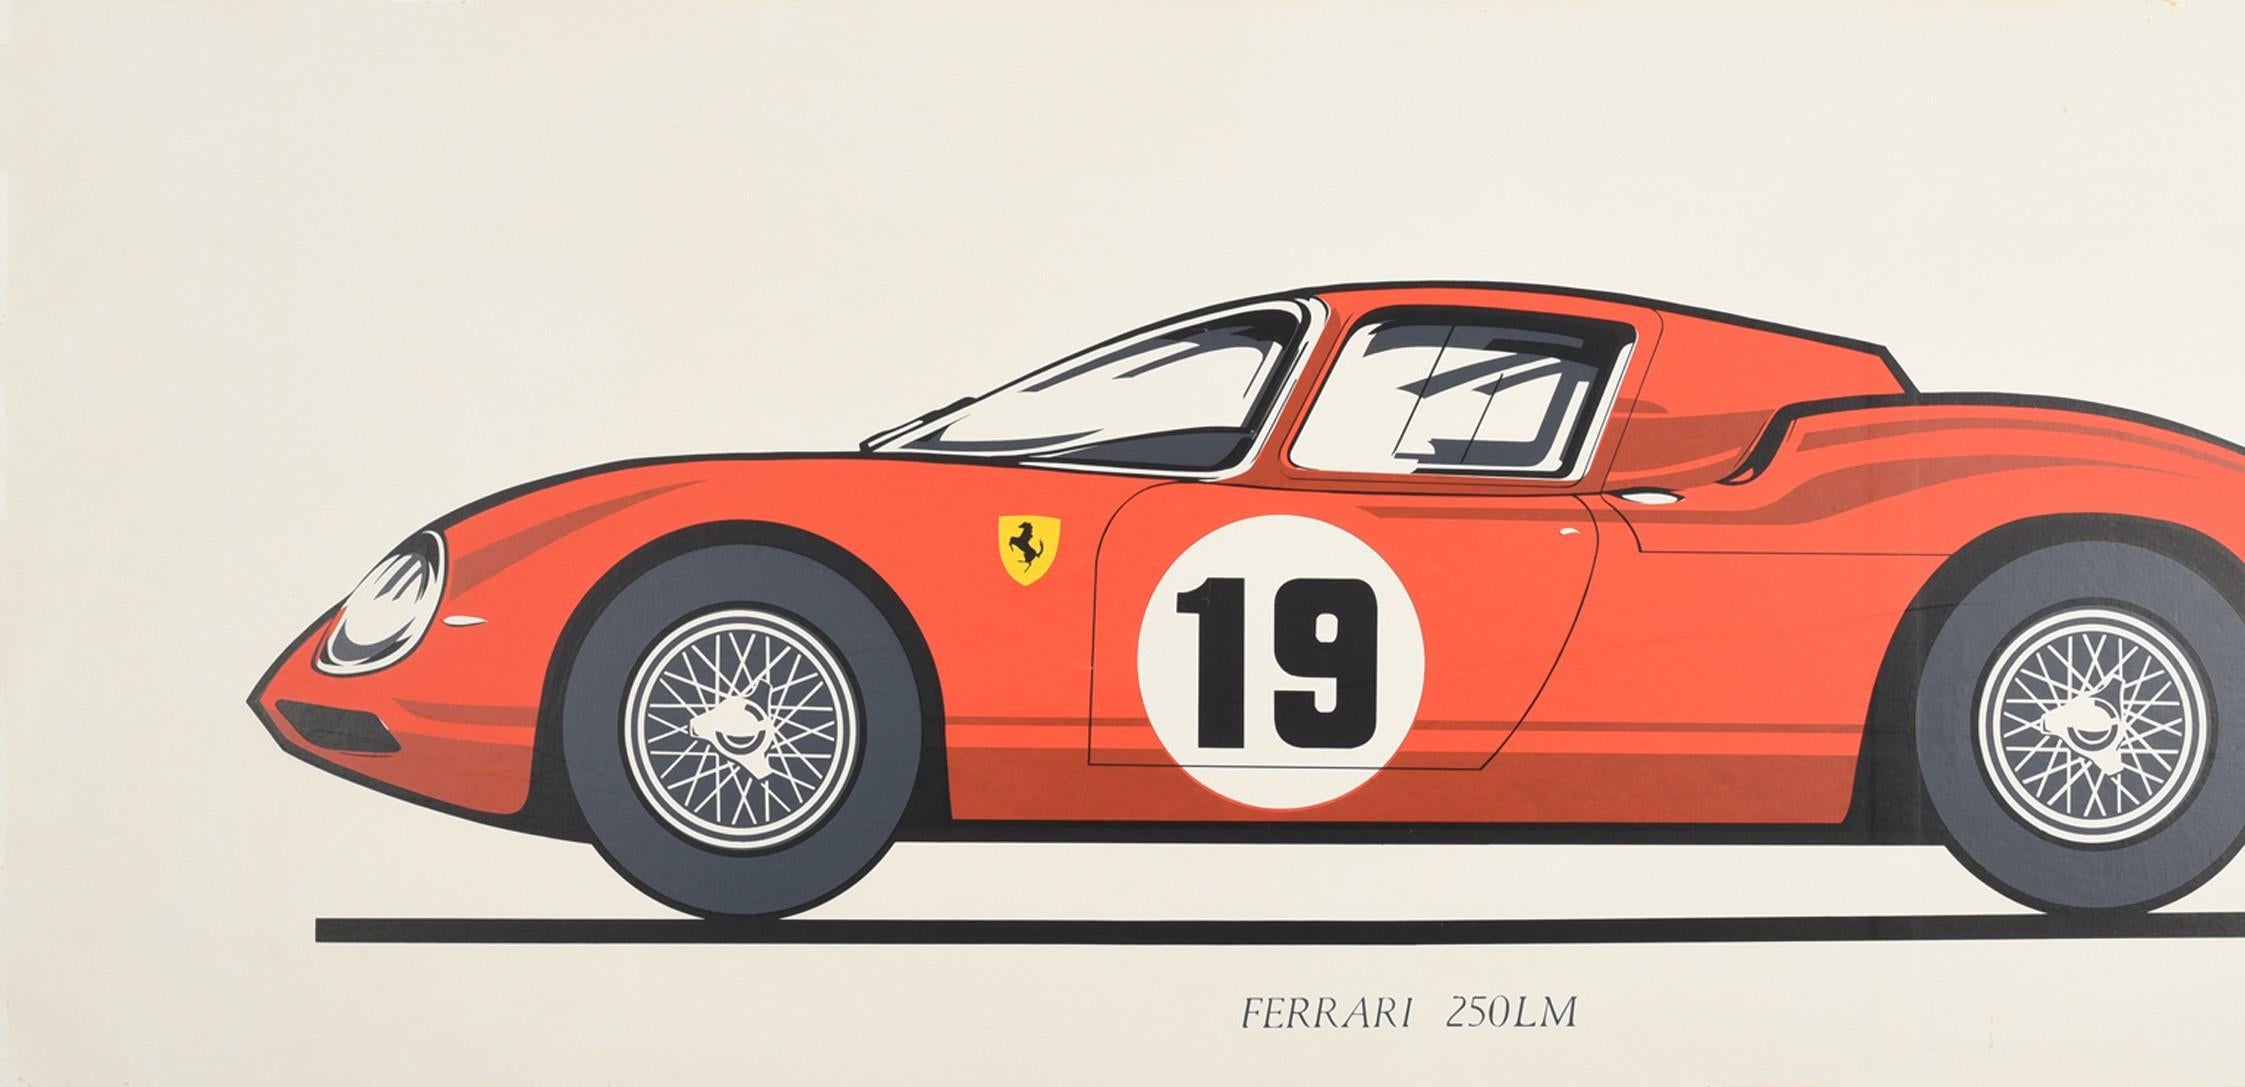 Original vintage car advertising poster for the Ferrari 250LM featuring a great side view illustration of a red Ferrari sports car with the iconic Ferrari logo of a black Cavallino Rampante / prancing horse on a yellow shield and a number 19 racing